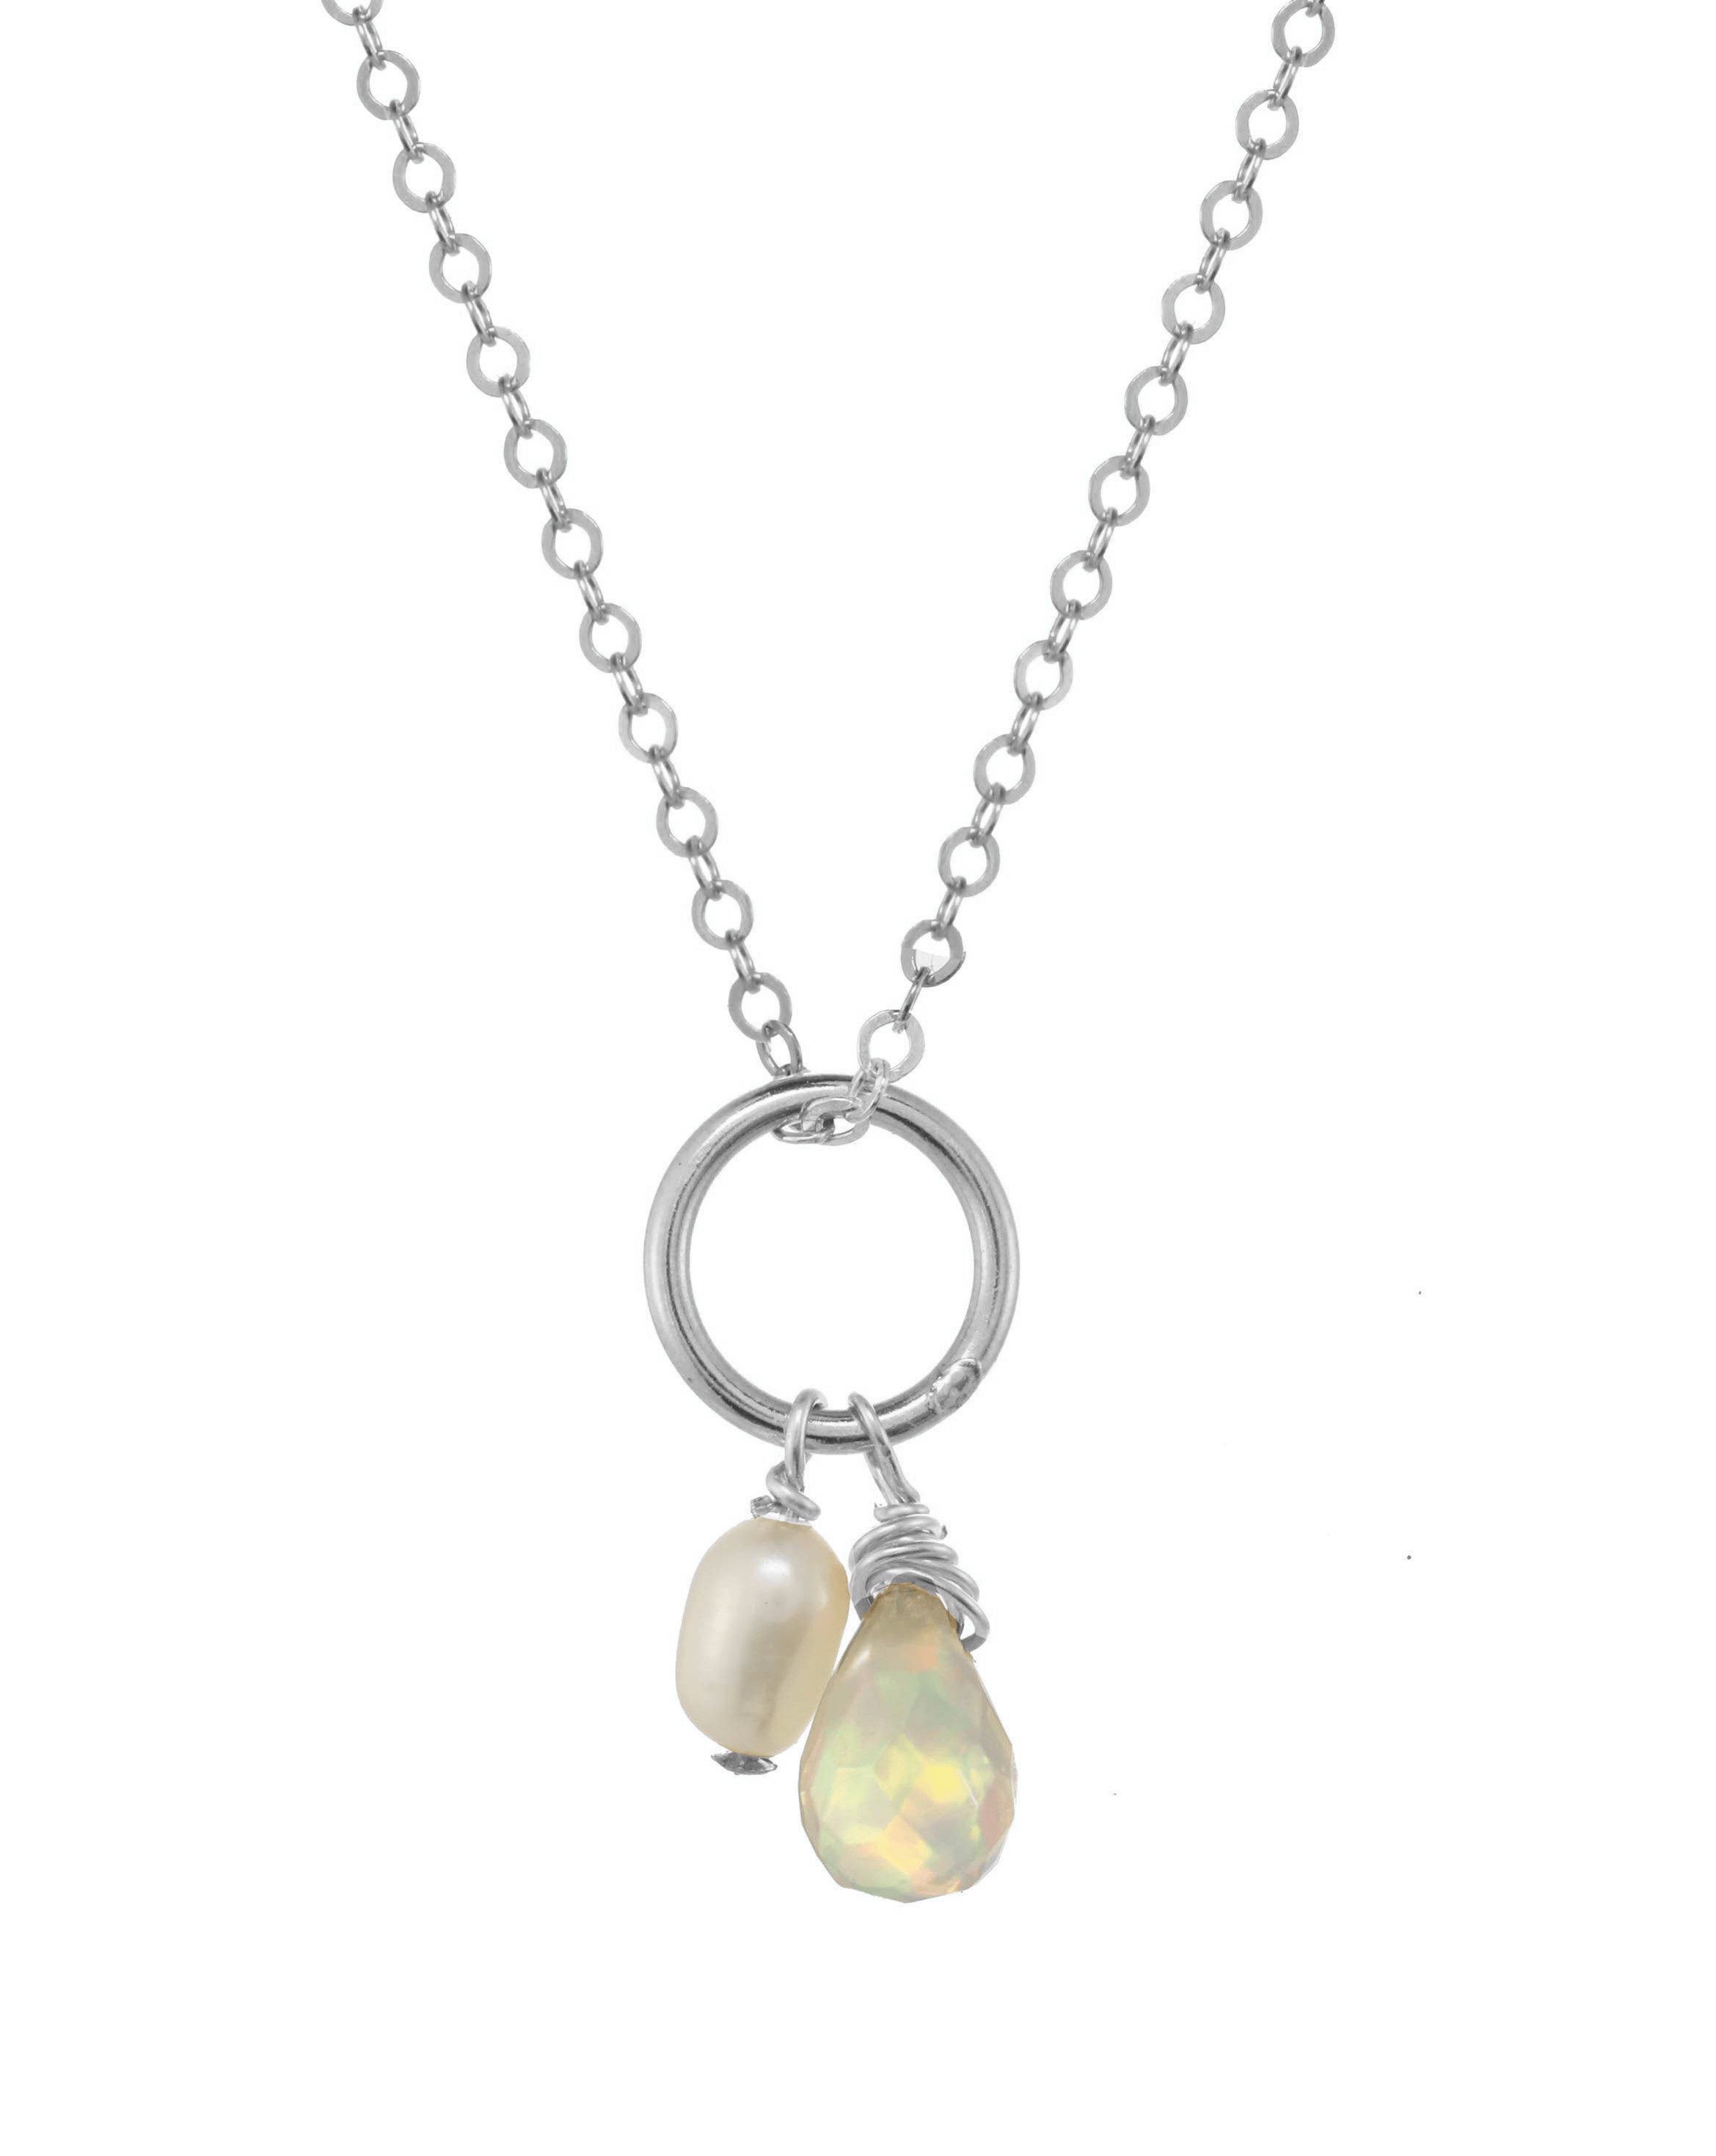 Mika Necklace by KOZAKH. A 16 to 18 inch adjustable length necklace, crafted in Sterling Silver, featuring a 3-4mm white rice Pearl and a 5-6mm faceted Ethiopian Opal droplet.